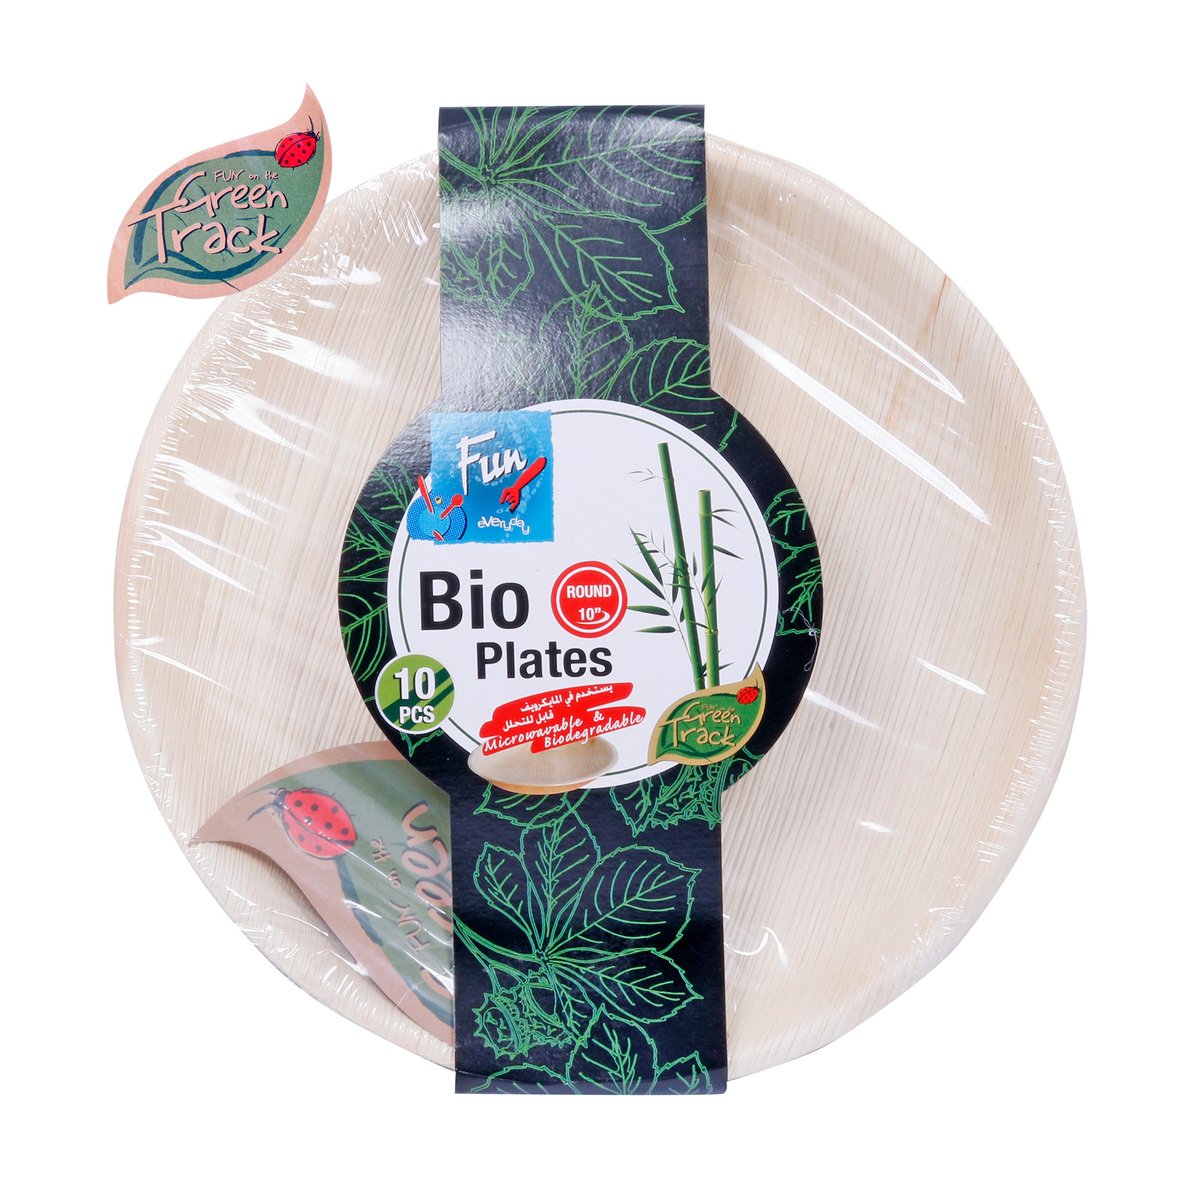 Fun Round Plates Biodegradable 10inches 10pcs